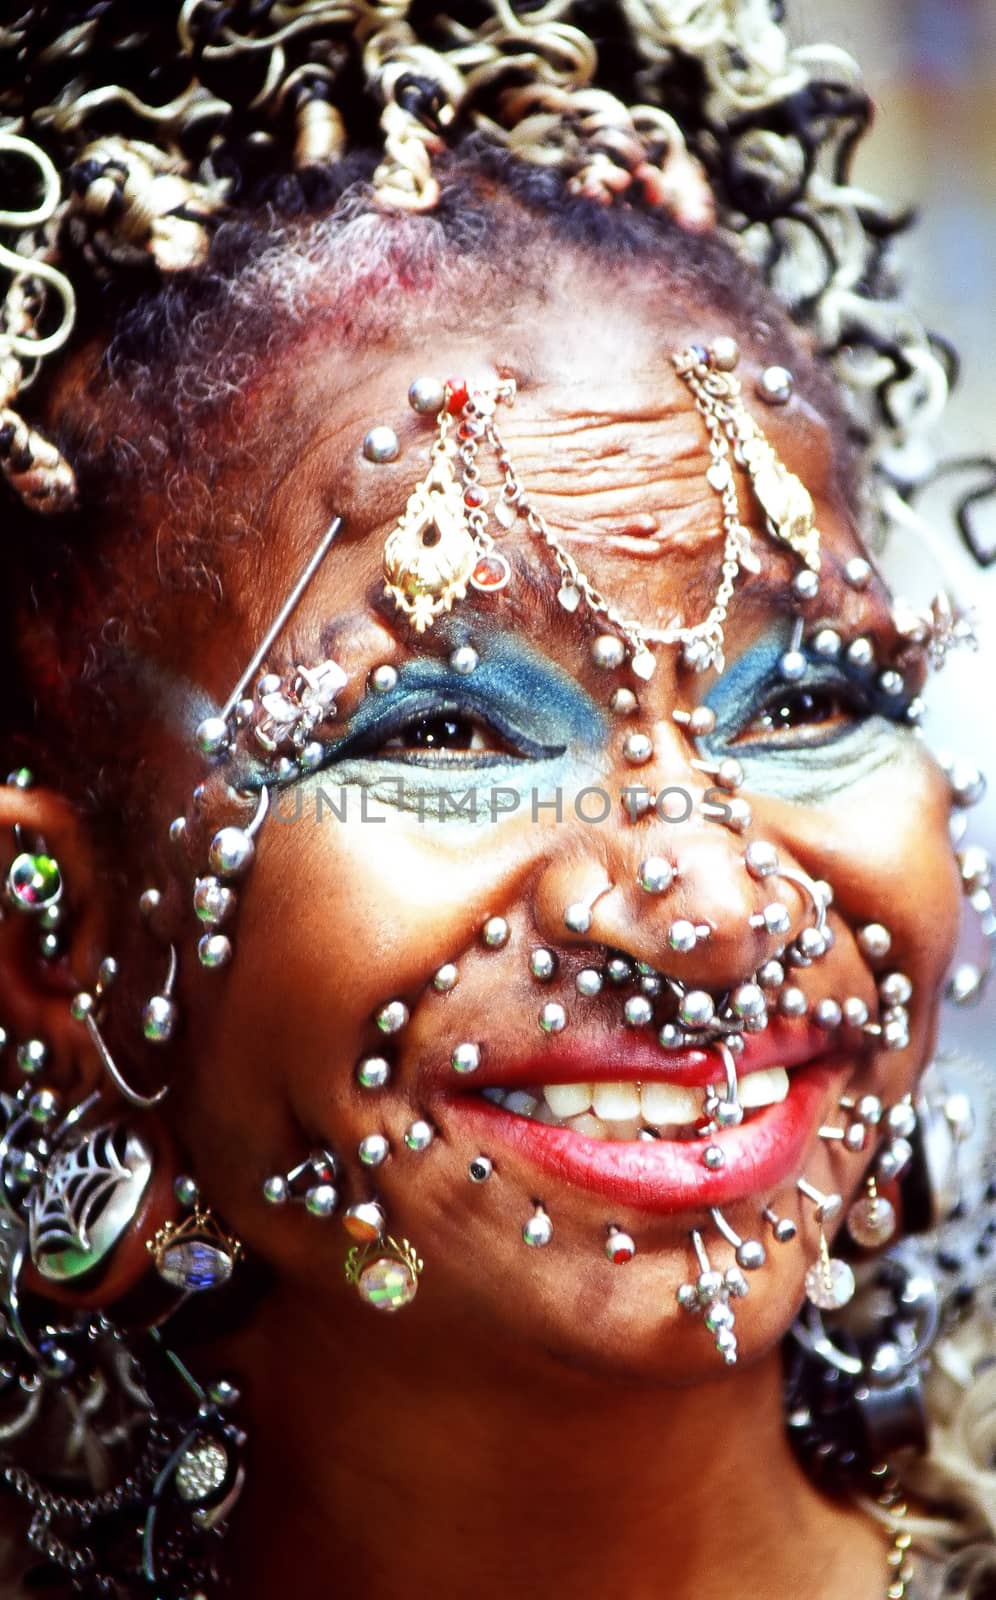 Elaine davidson holds the world record for the most face and body piercings.